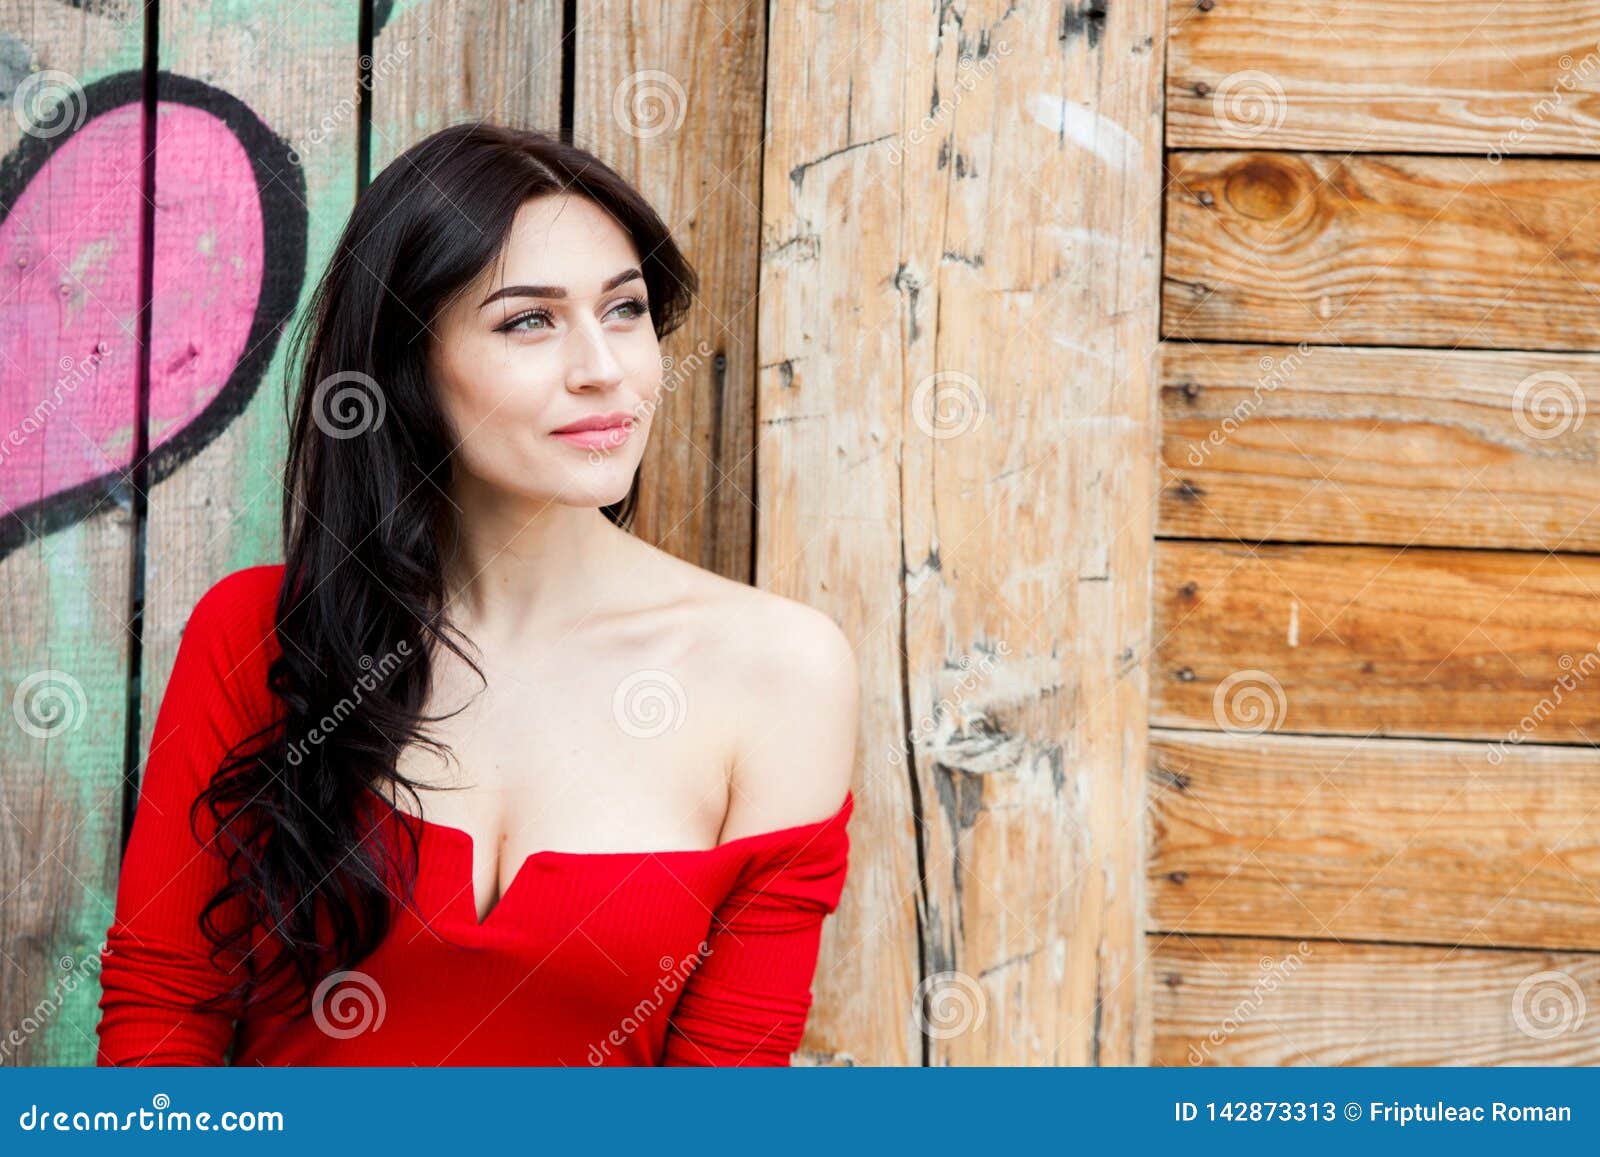 Emotional Portrait Of A Young European Girl With Pure And 